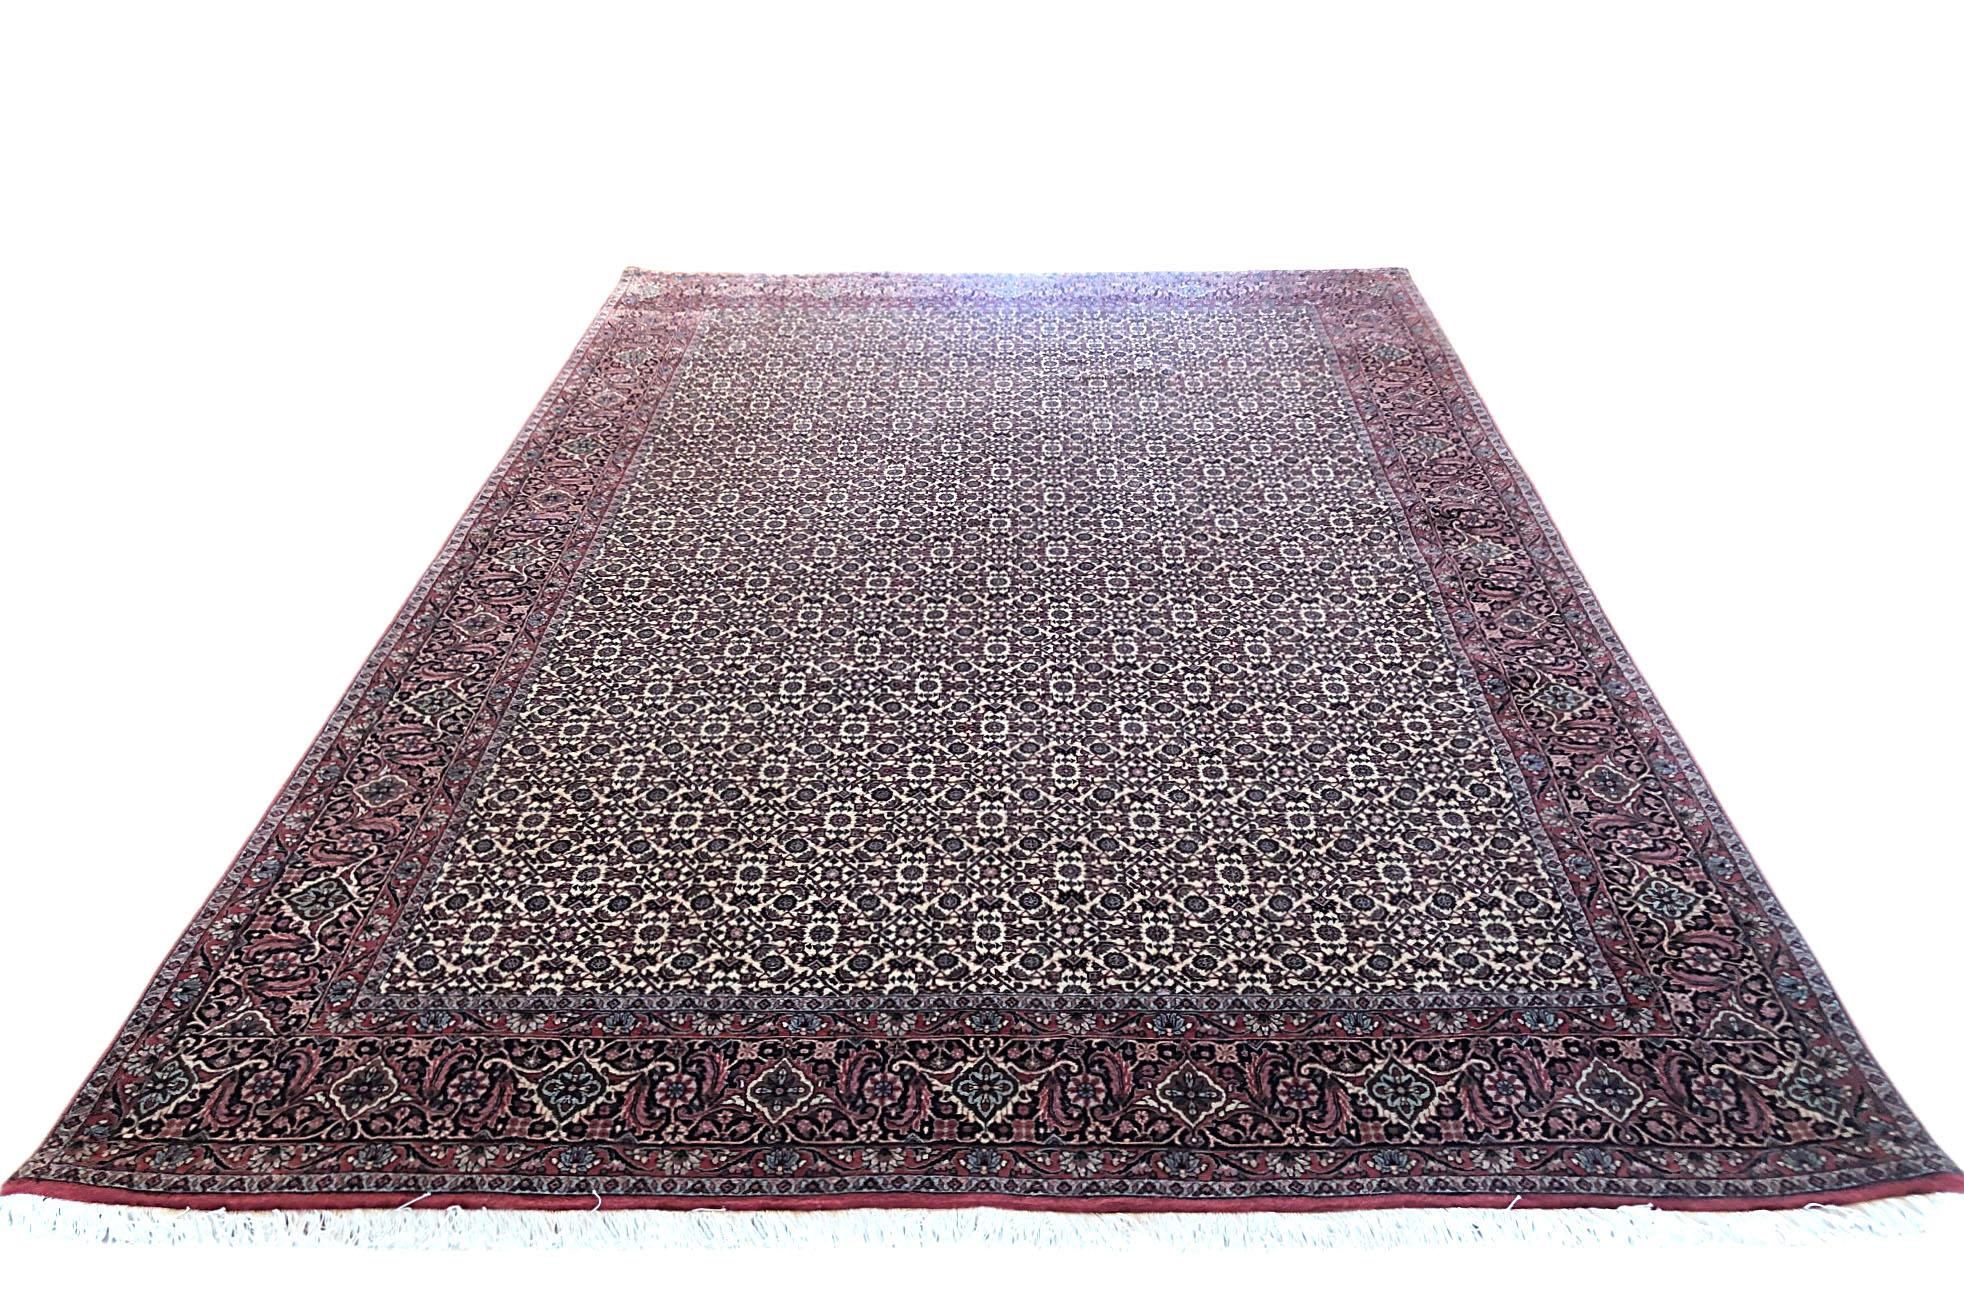 This piece is a handmade Persian Bijar rug. The pile is wool with cotton foundation. This beautiful Persian Bijar rug has all-over Herati design and it is among the most hard wearing rug. It is made using high-quality wool, and the knots are beaten